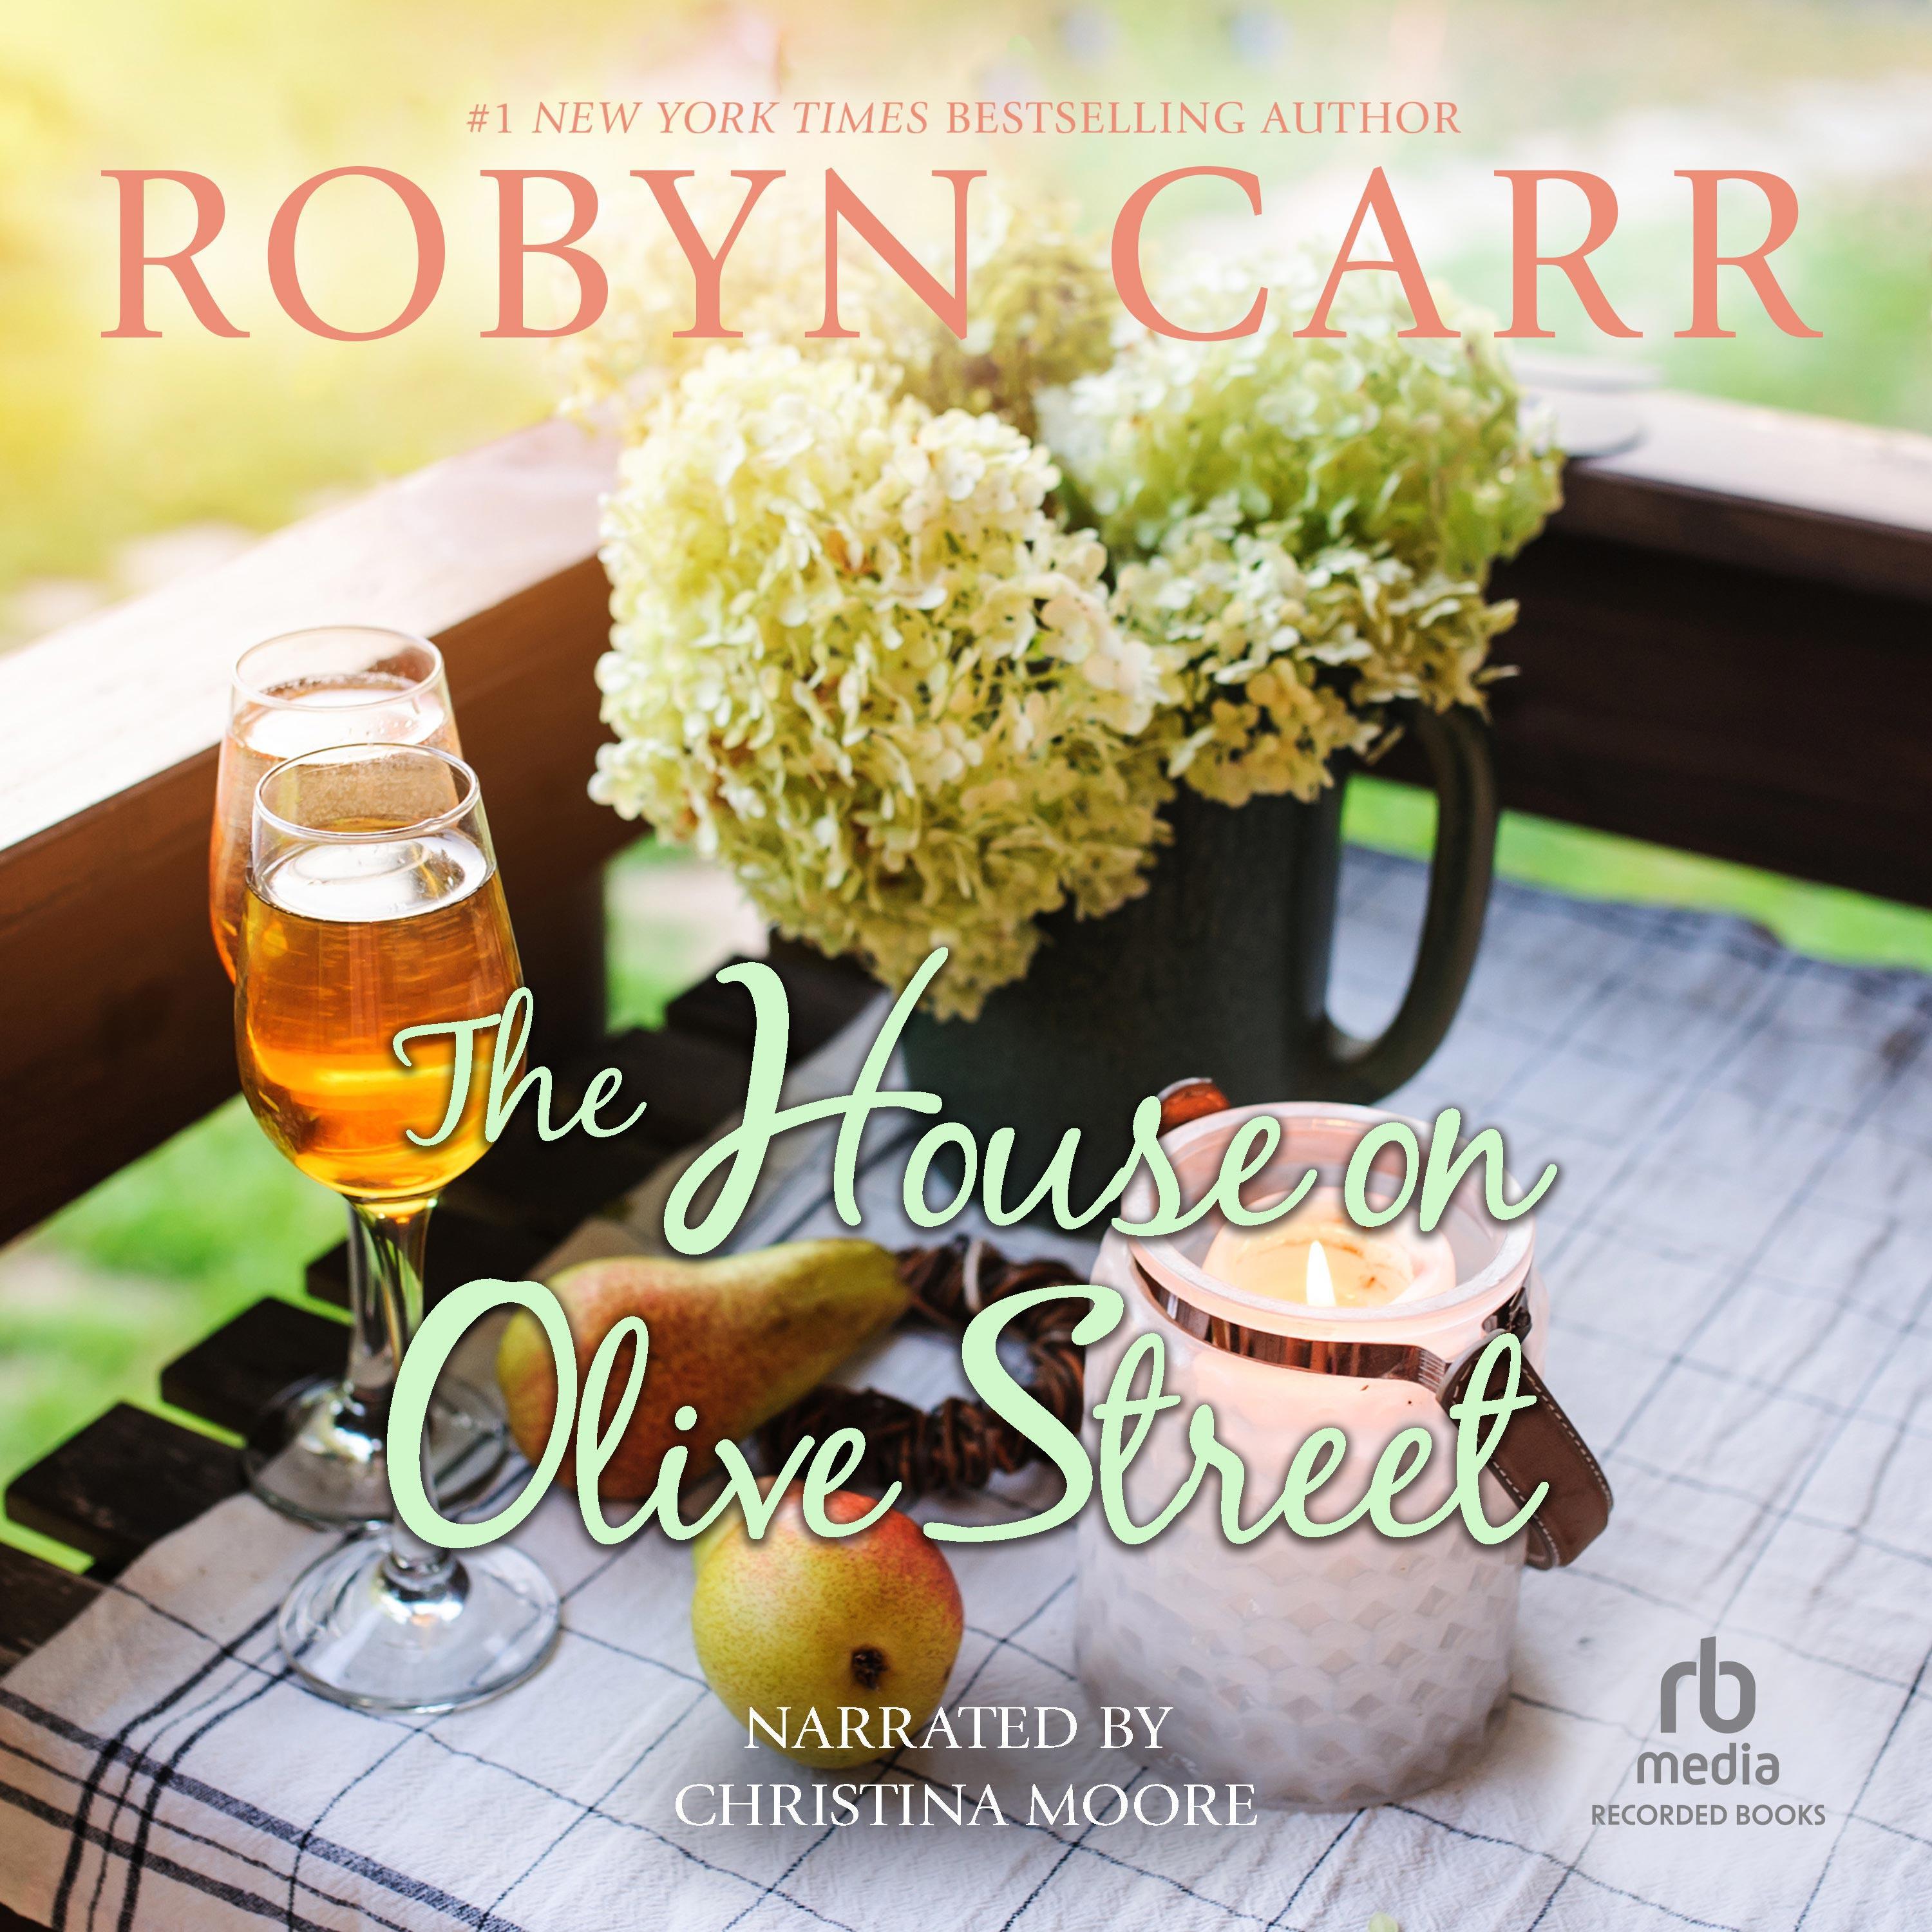 93 Best Seller Author Robyn Carr Book List for Kids